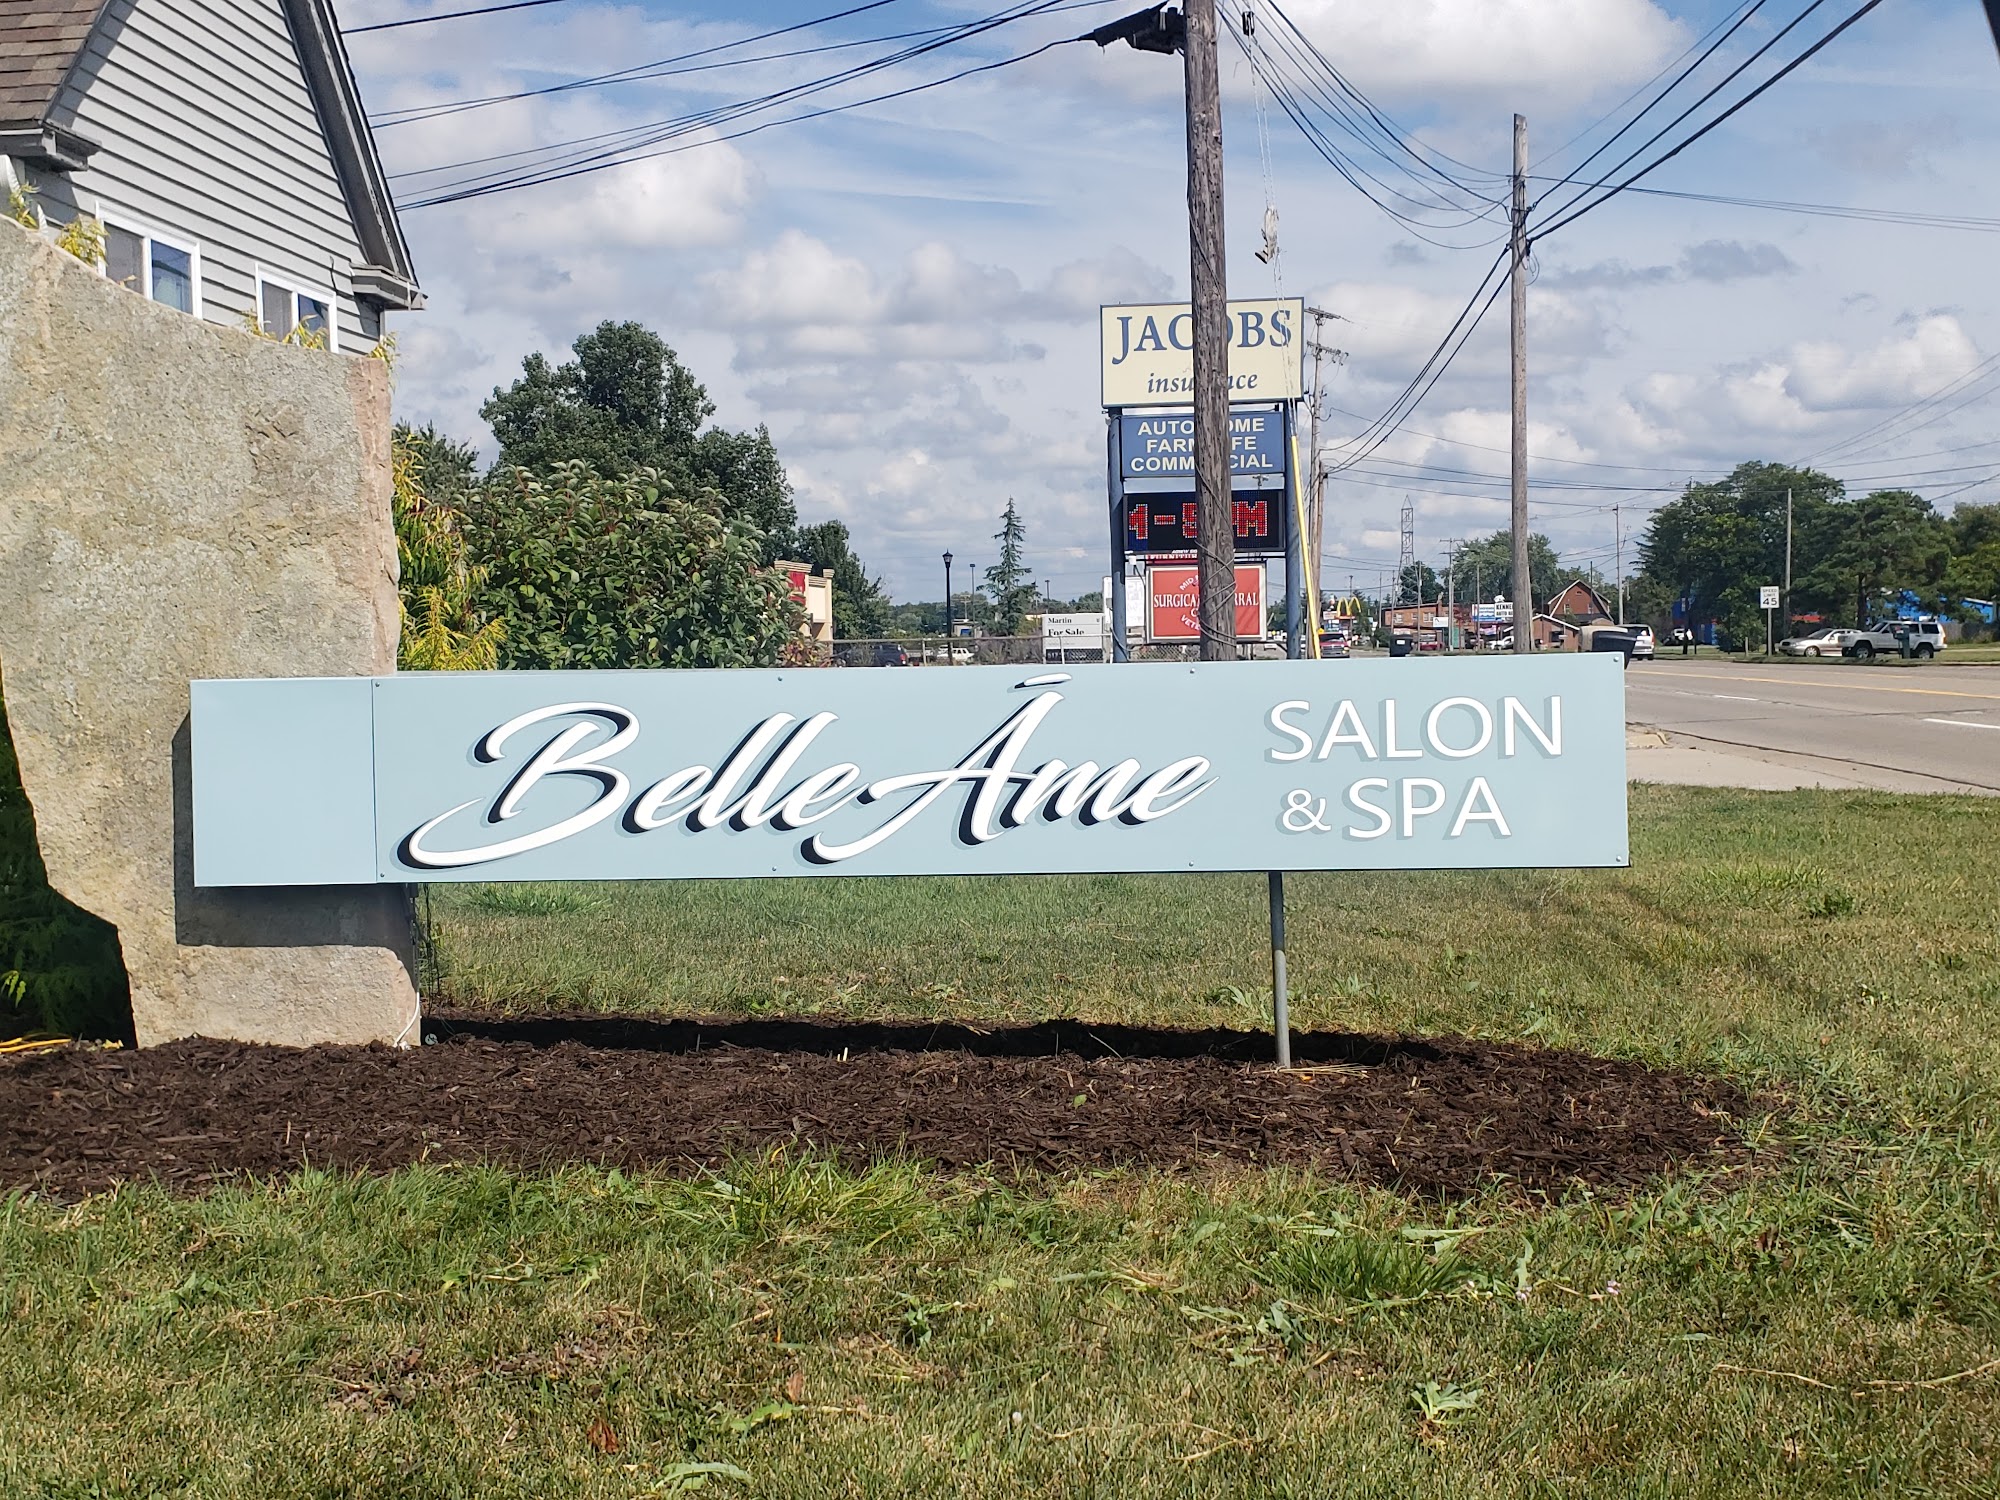 Belle ame Salon and Spa